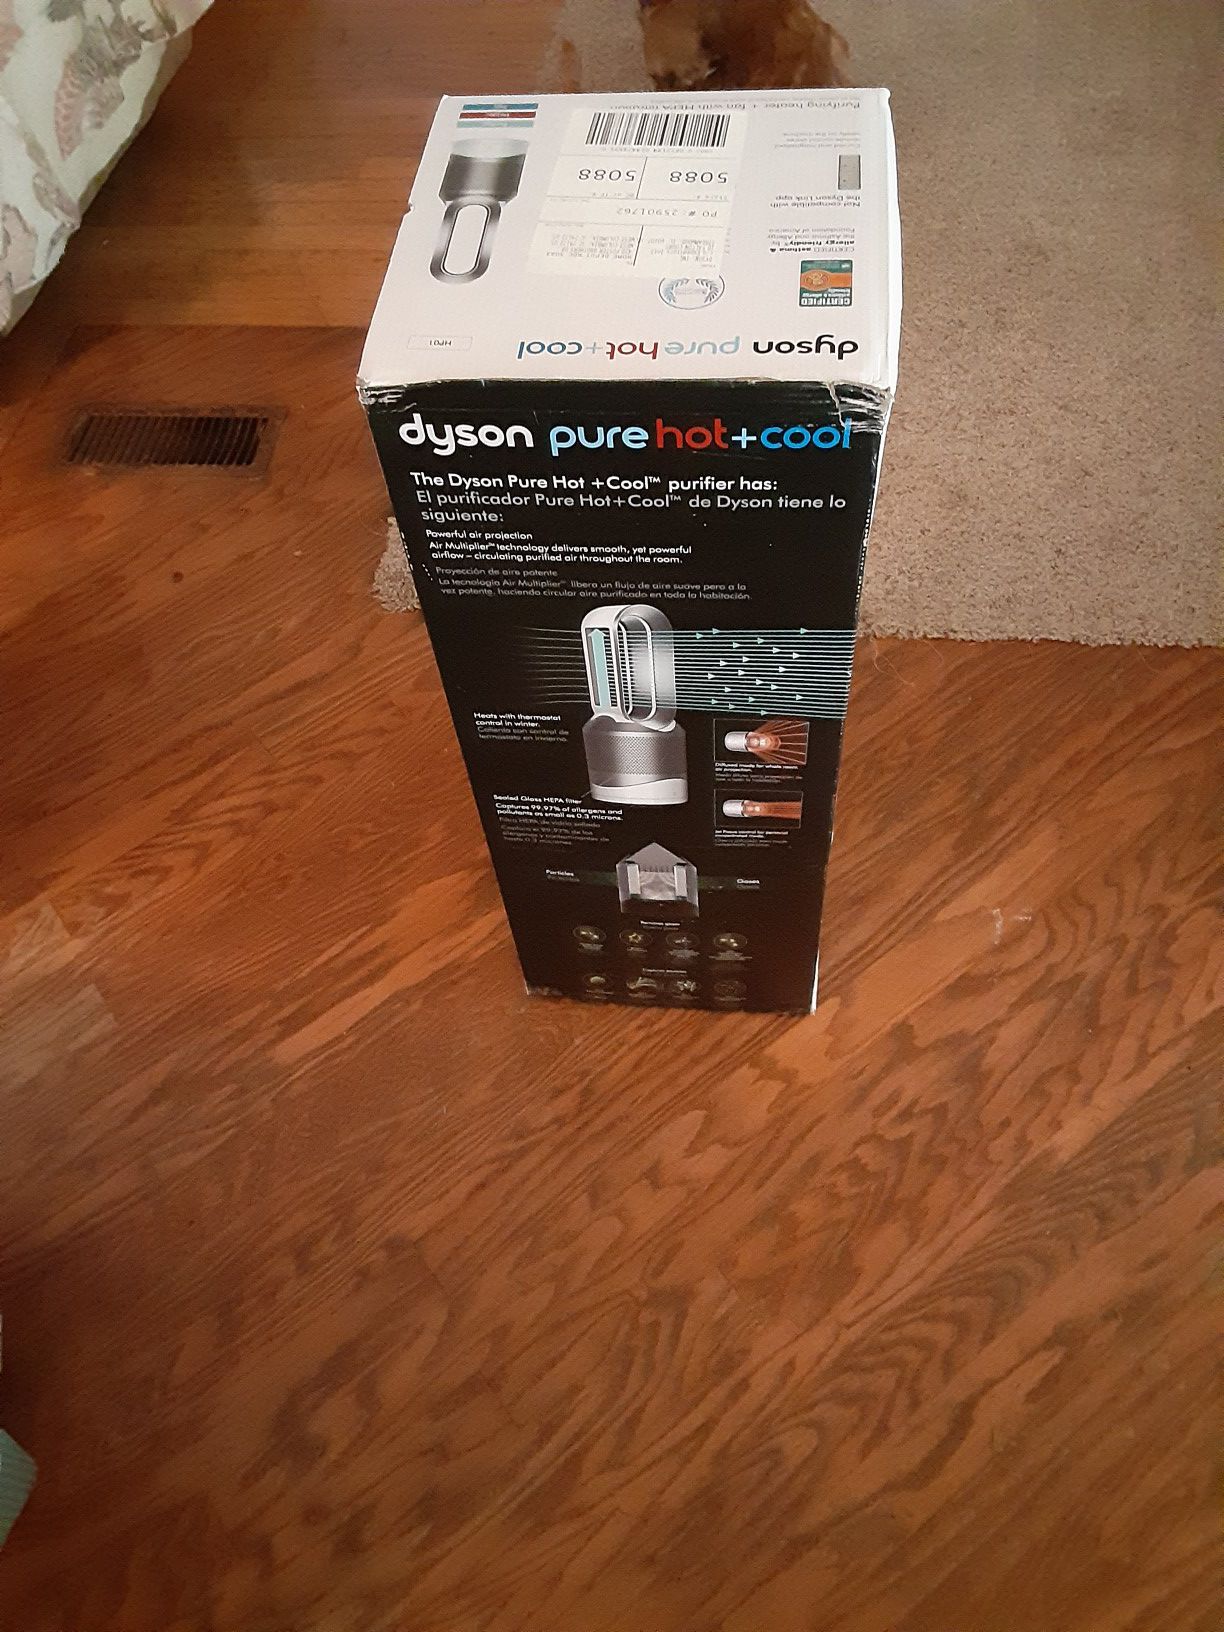 Dyson pure hot and cool conditioner